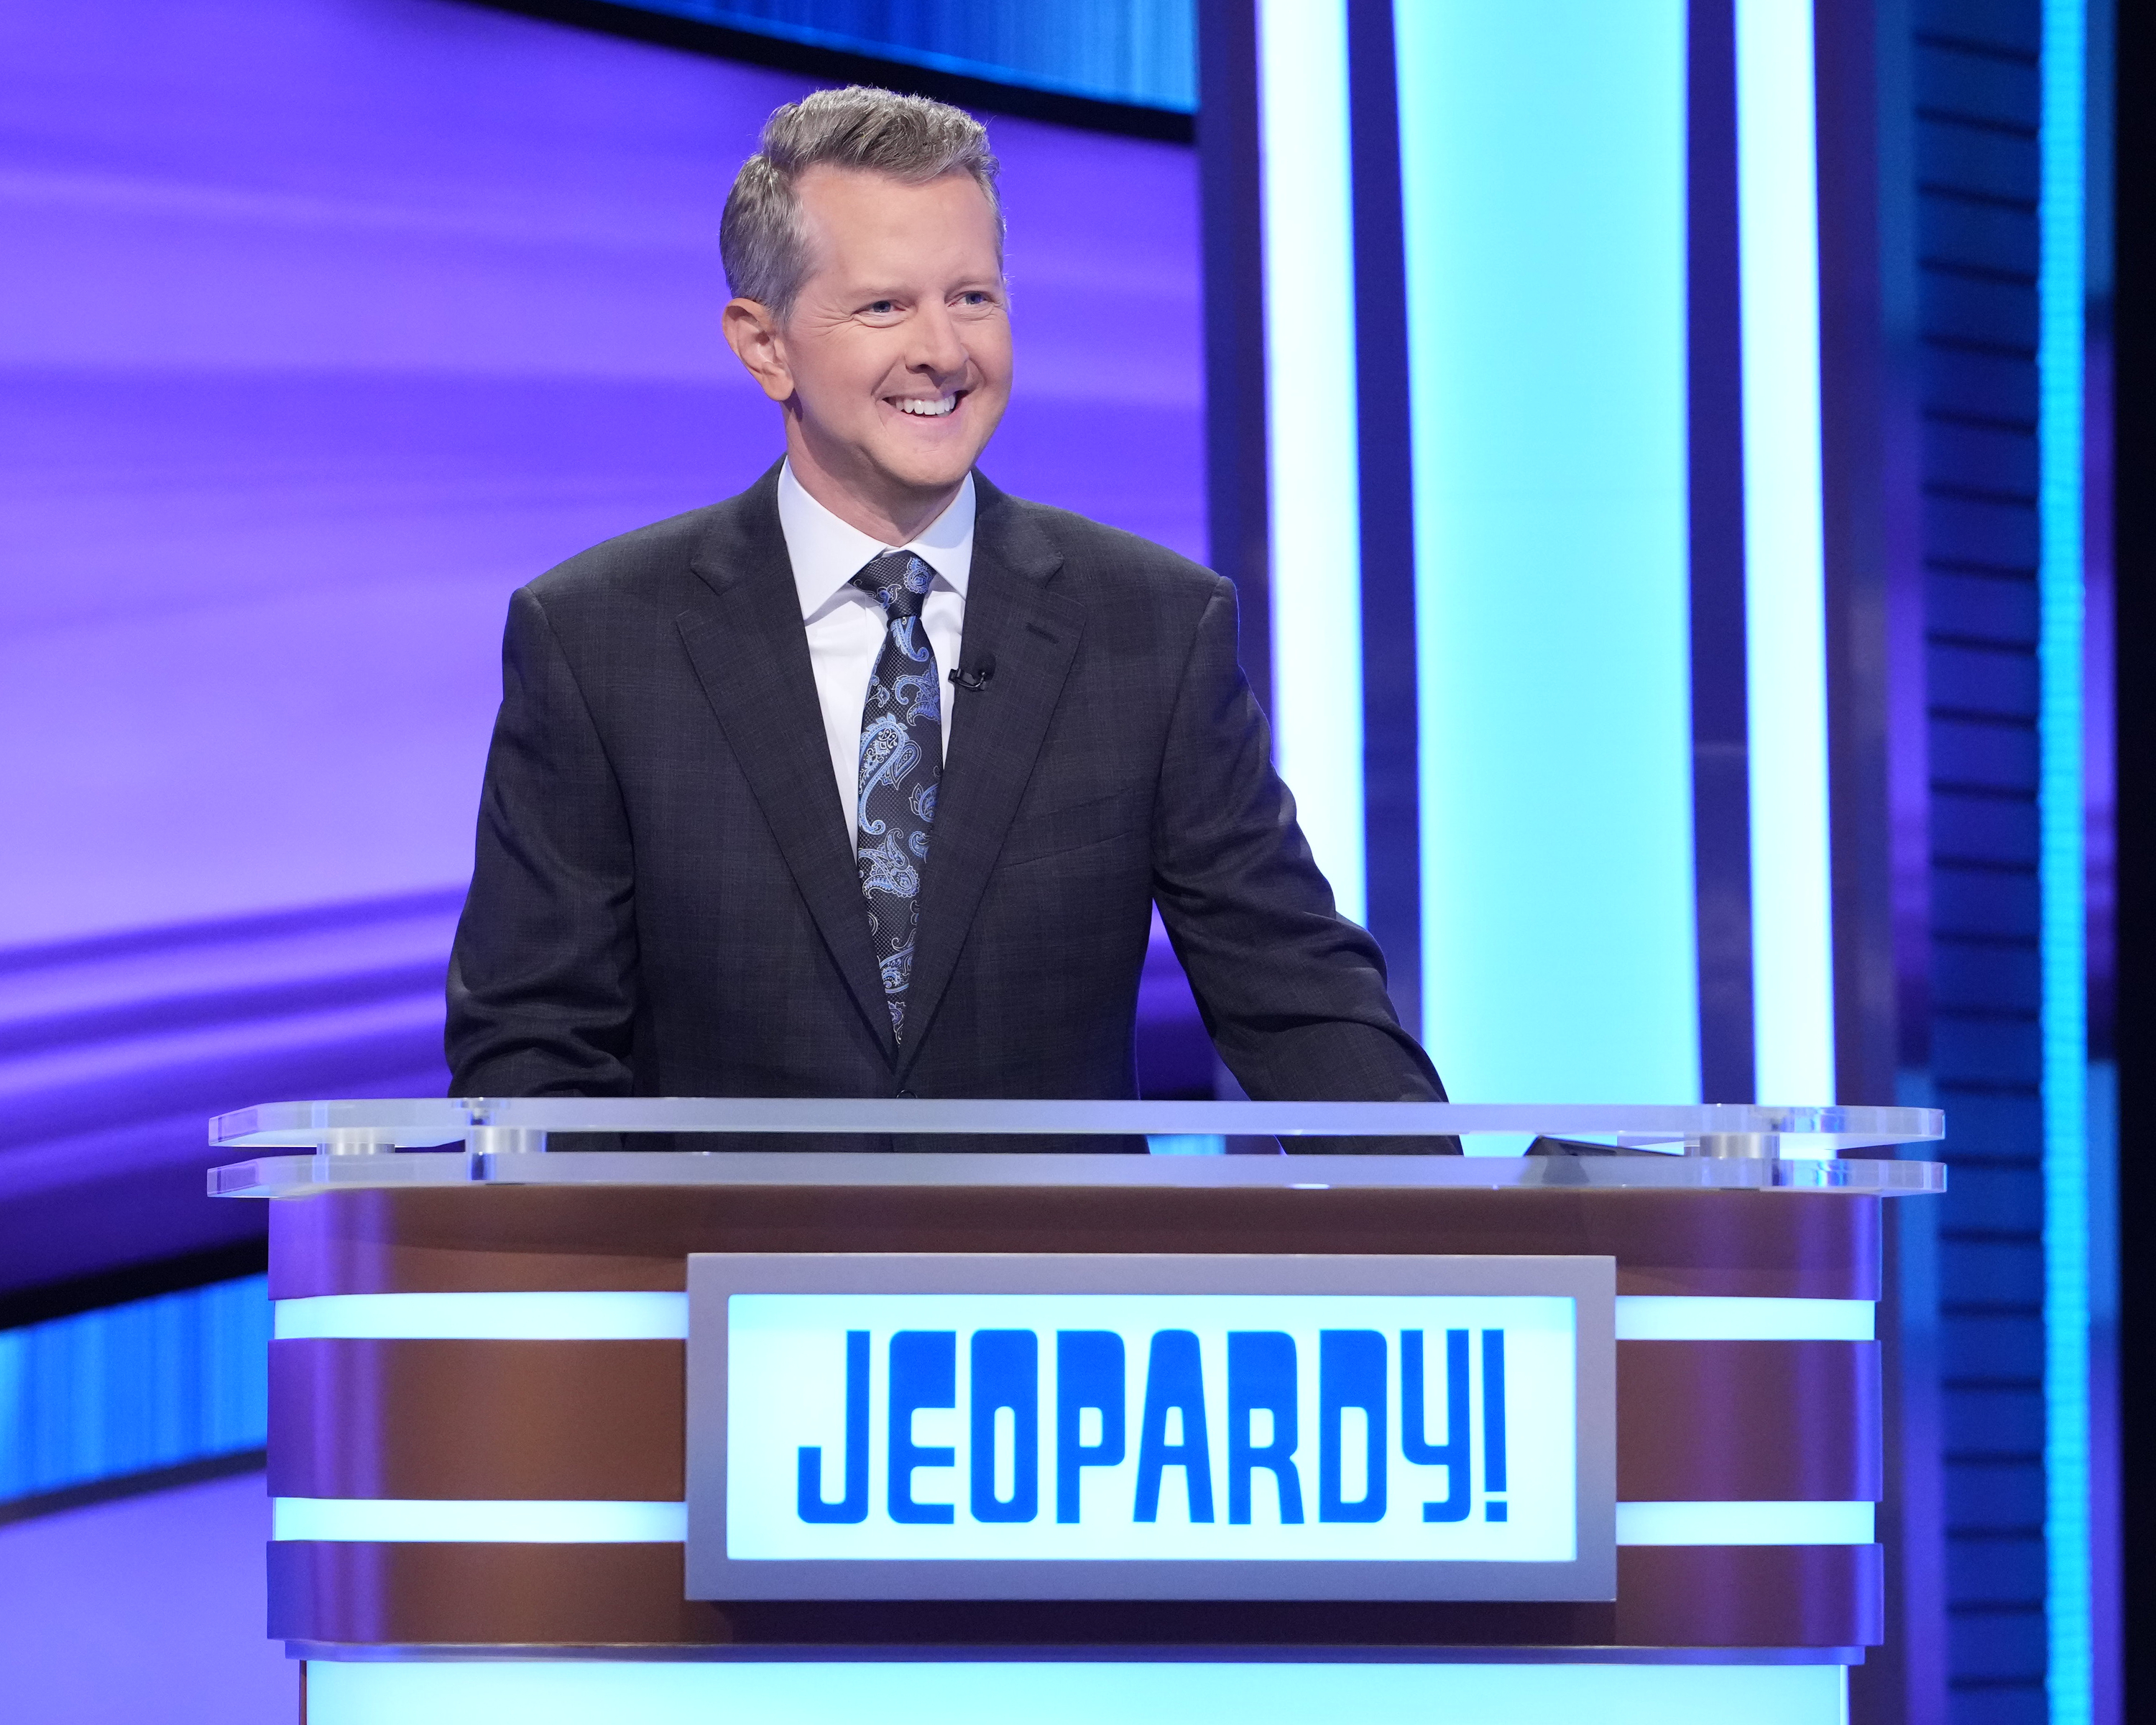 Ken smiling in a suit and tie on Jeopardy